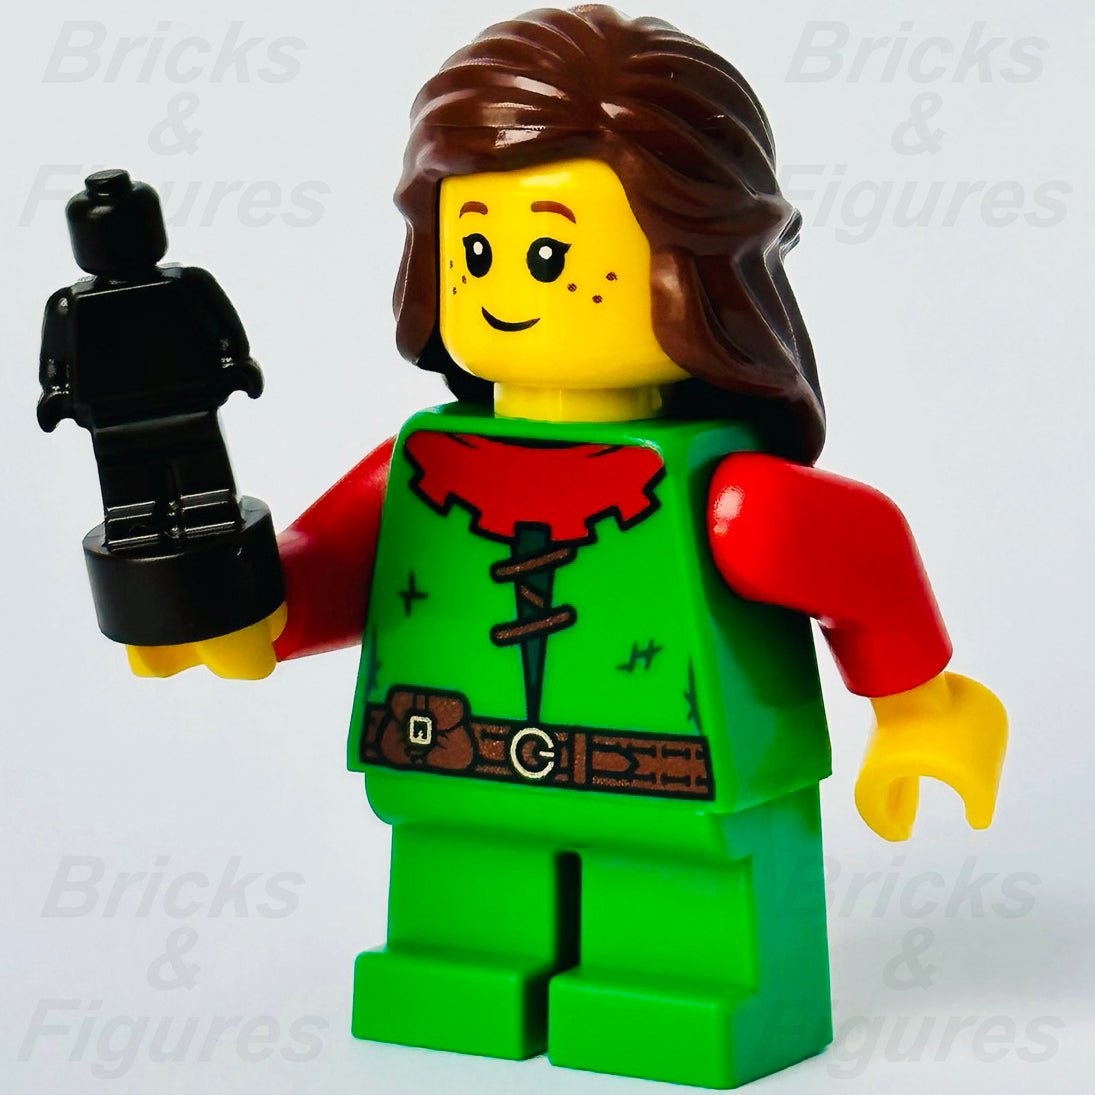 LEGO Forest Girl Castle Forestmen Minifigure with Statuette 10305 cas573 New - Bricks & Figures